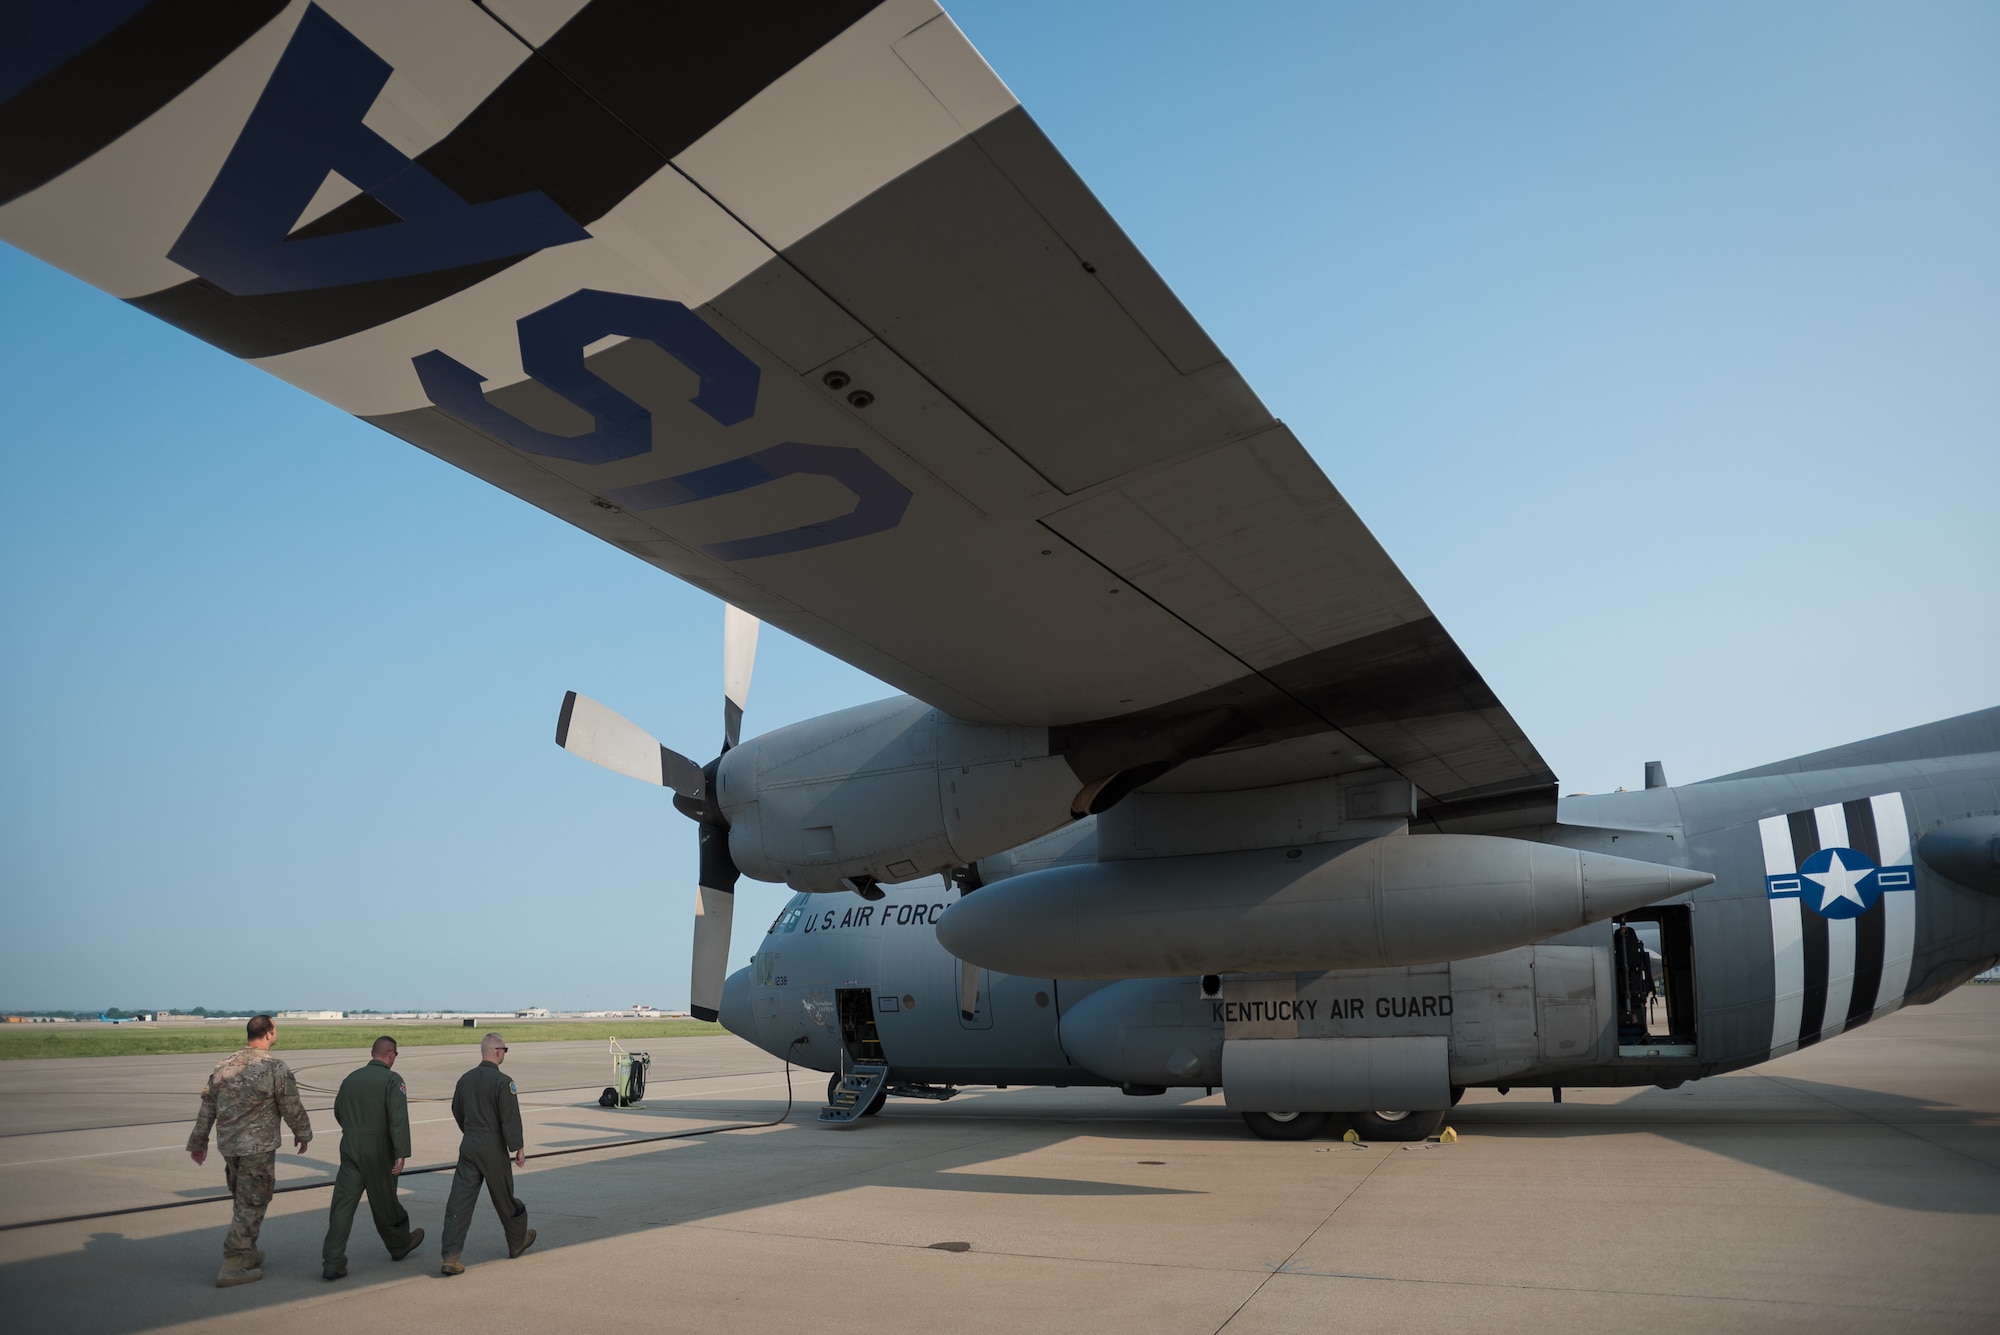 Members of the 123rd Airlift Wing board a C-130 Hercules aircraft at the Kentucky Air National Guard Base in Louisville, Ky., June 1, 2019, en route to France, where they will participate in the 75th-anniversary reenactment of D-Day. Two Kentucky C-130s will airdrop U.S. Army paratroopers over Normandy on June 9 as part of the commemoration. The aircraft has been striped with historically accurate Allied Forces livery in honor of the event, which turned the tide of World War II in the European theater. (U.S. Air National Guard photo by Dale Greer)